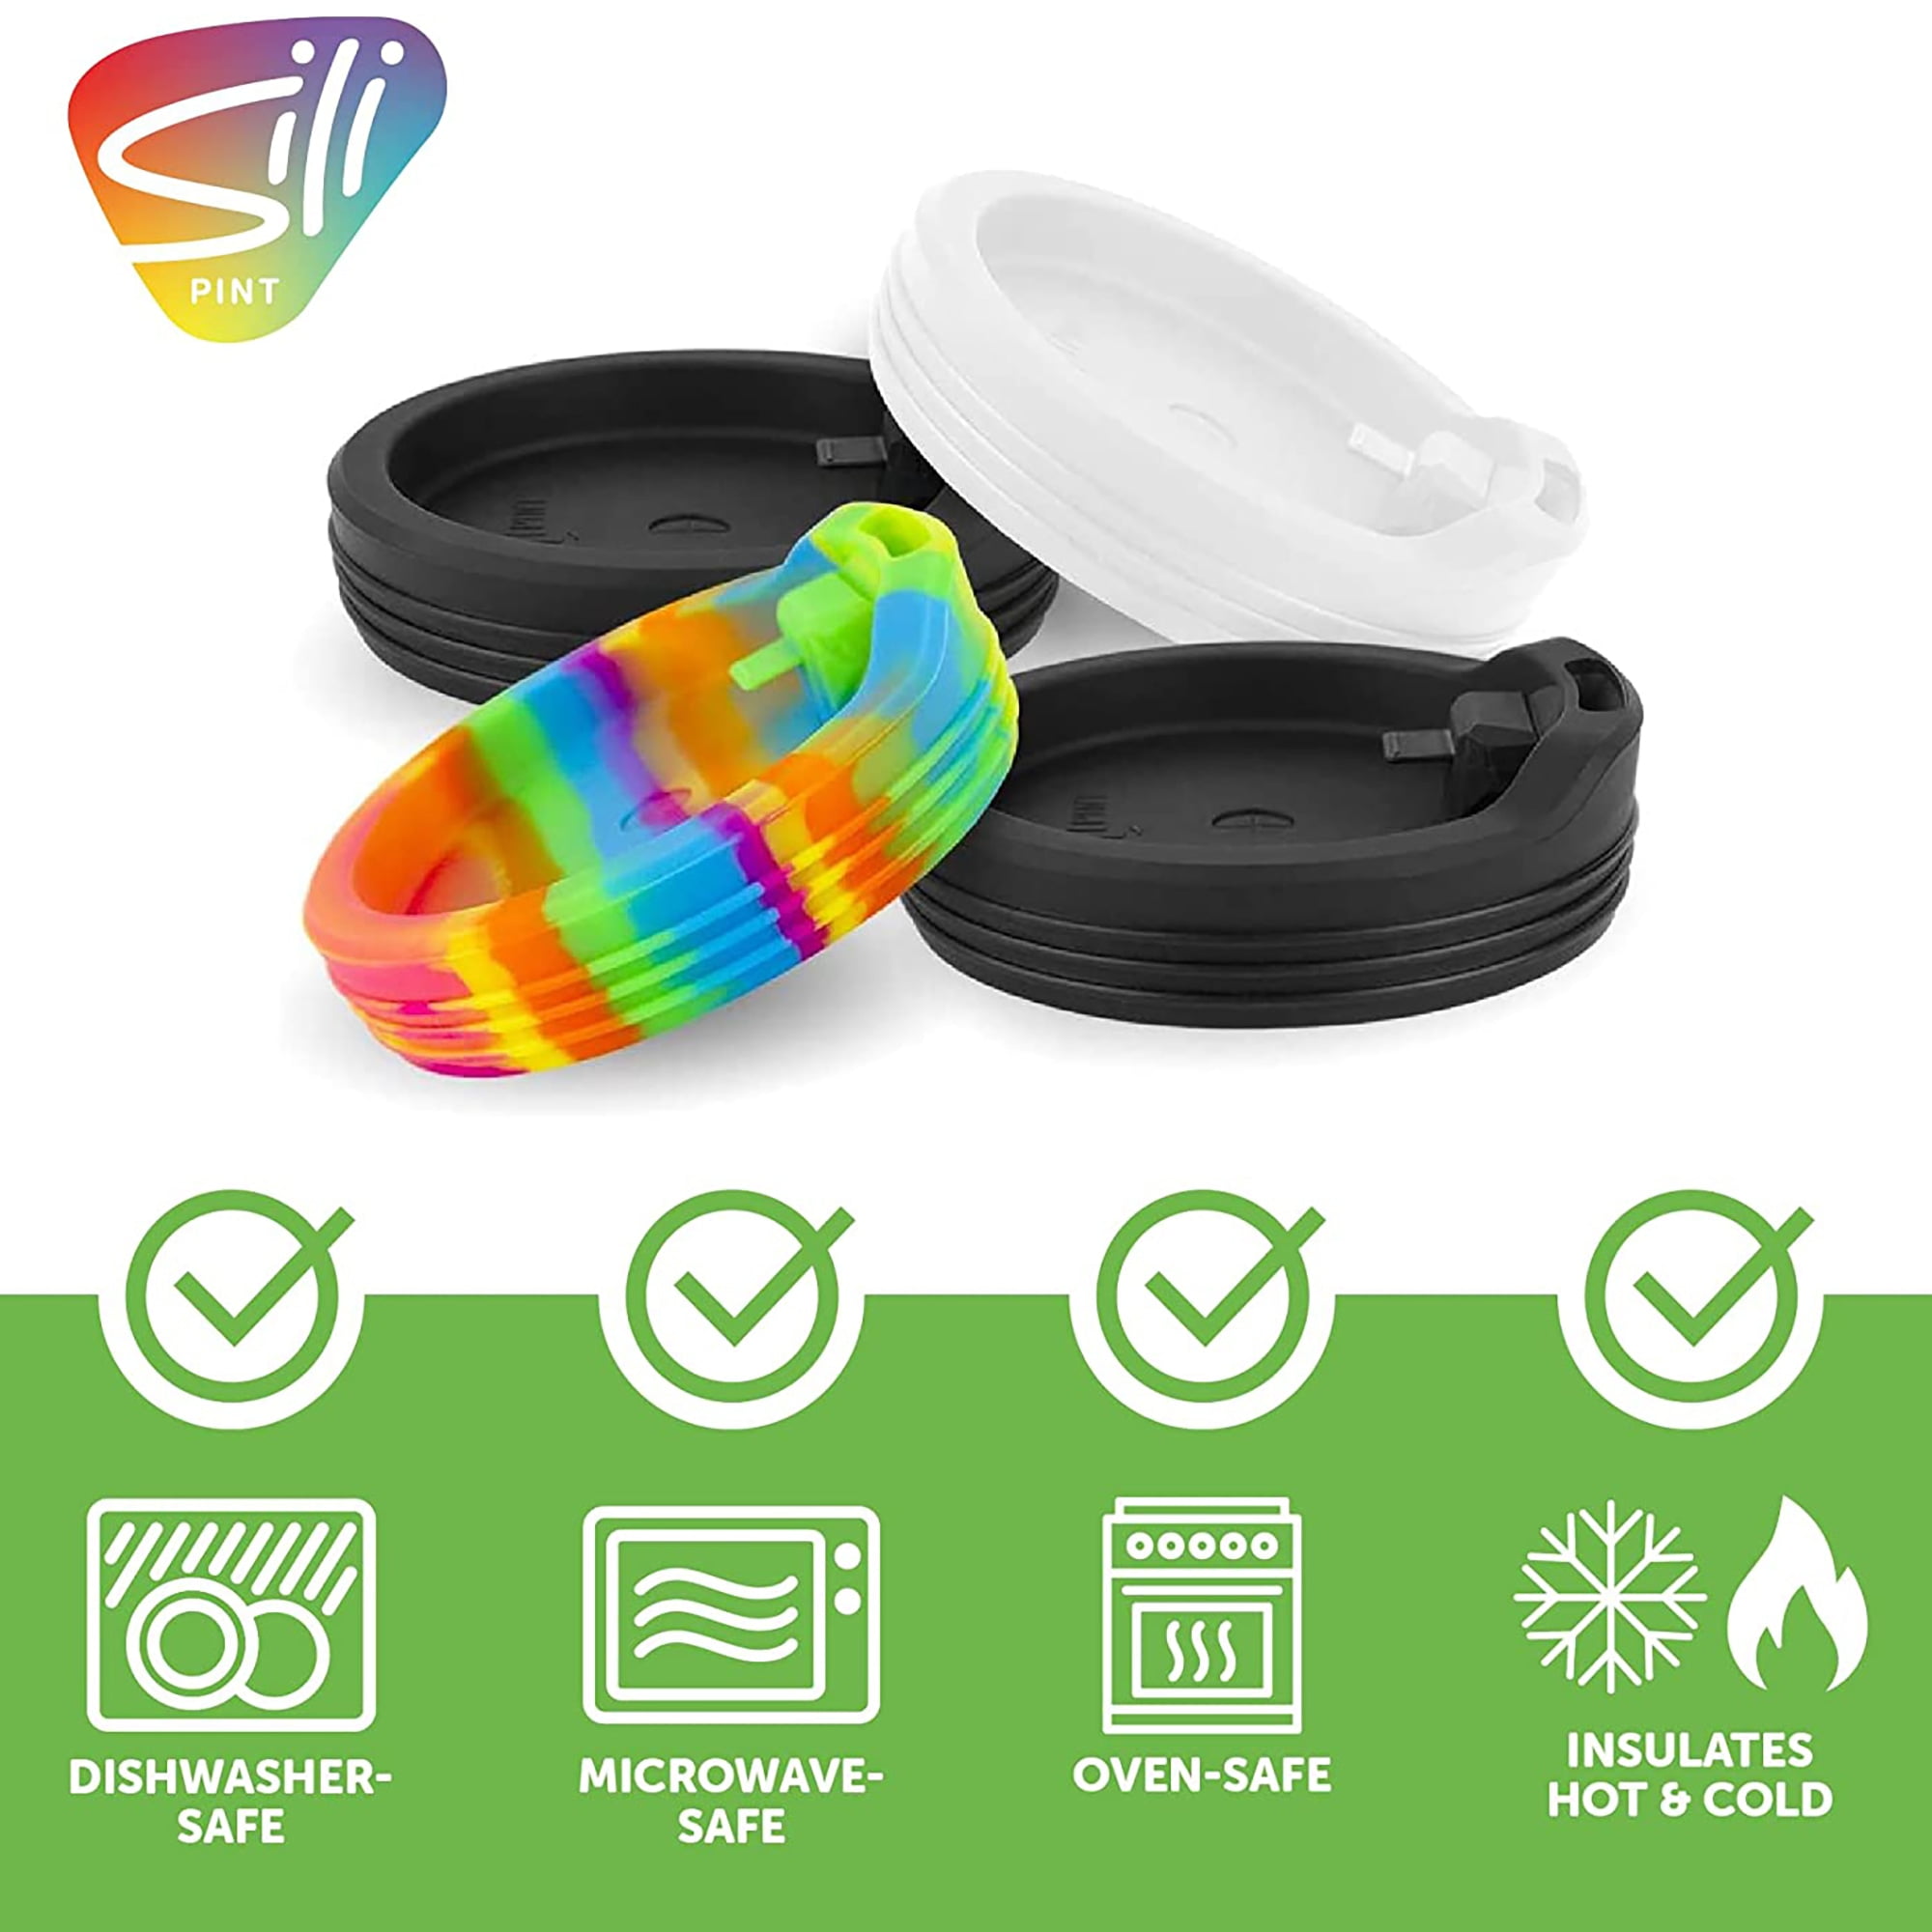 Silipint Silicone Travel-Cup Lids Kids' Cups and Wine Cups, Lid-Pack